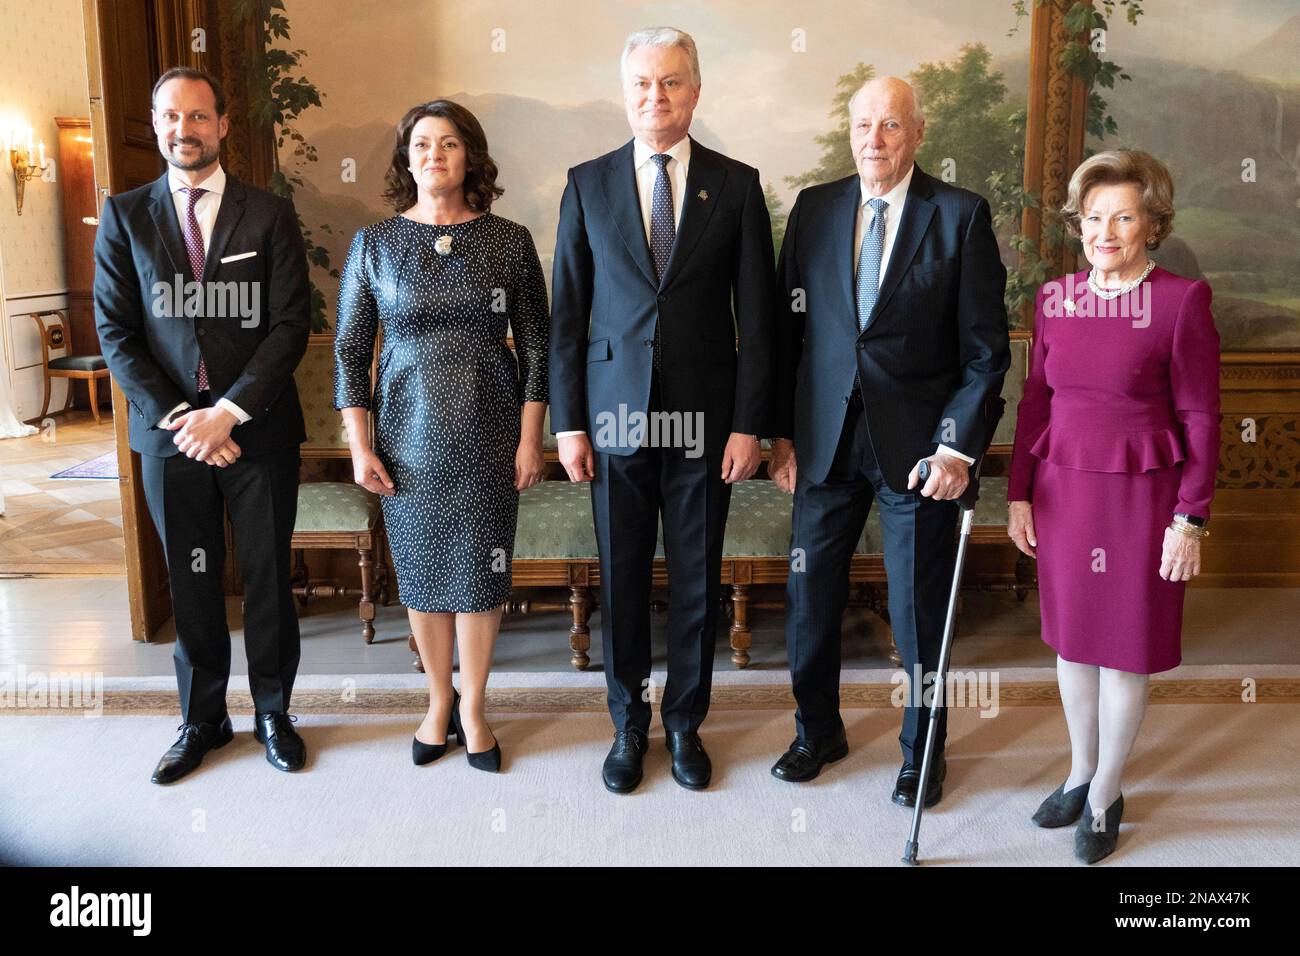 Oslo 20230213.King Harald and Queen Sonja receive Lithuanian President Gitanas Nauseda and First Lady Diana Nausediene in audience at the Palace in Oslo on Monday. Crown Prince Haakon to the left.  Photo: Terje Pedersen / NTB Stock Photo